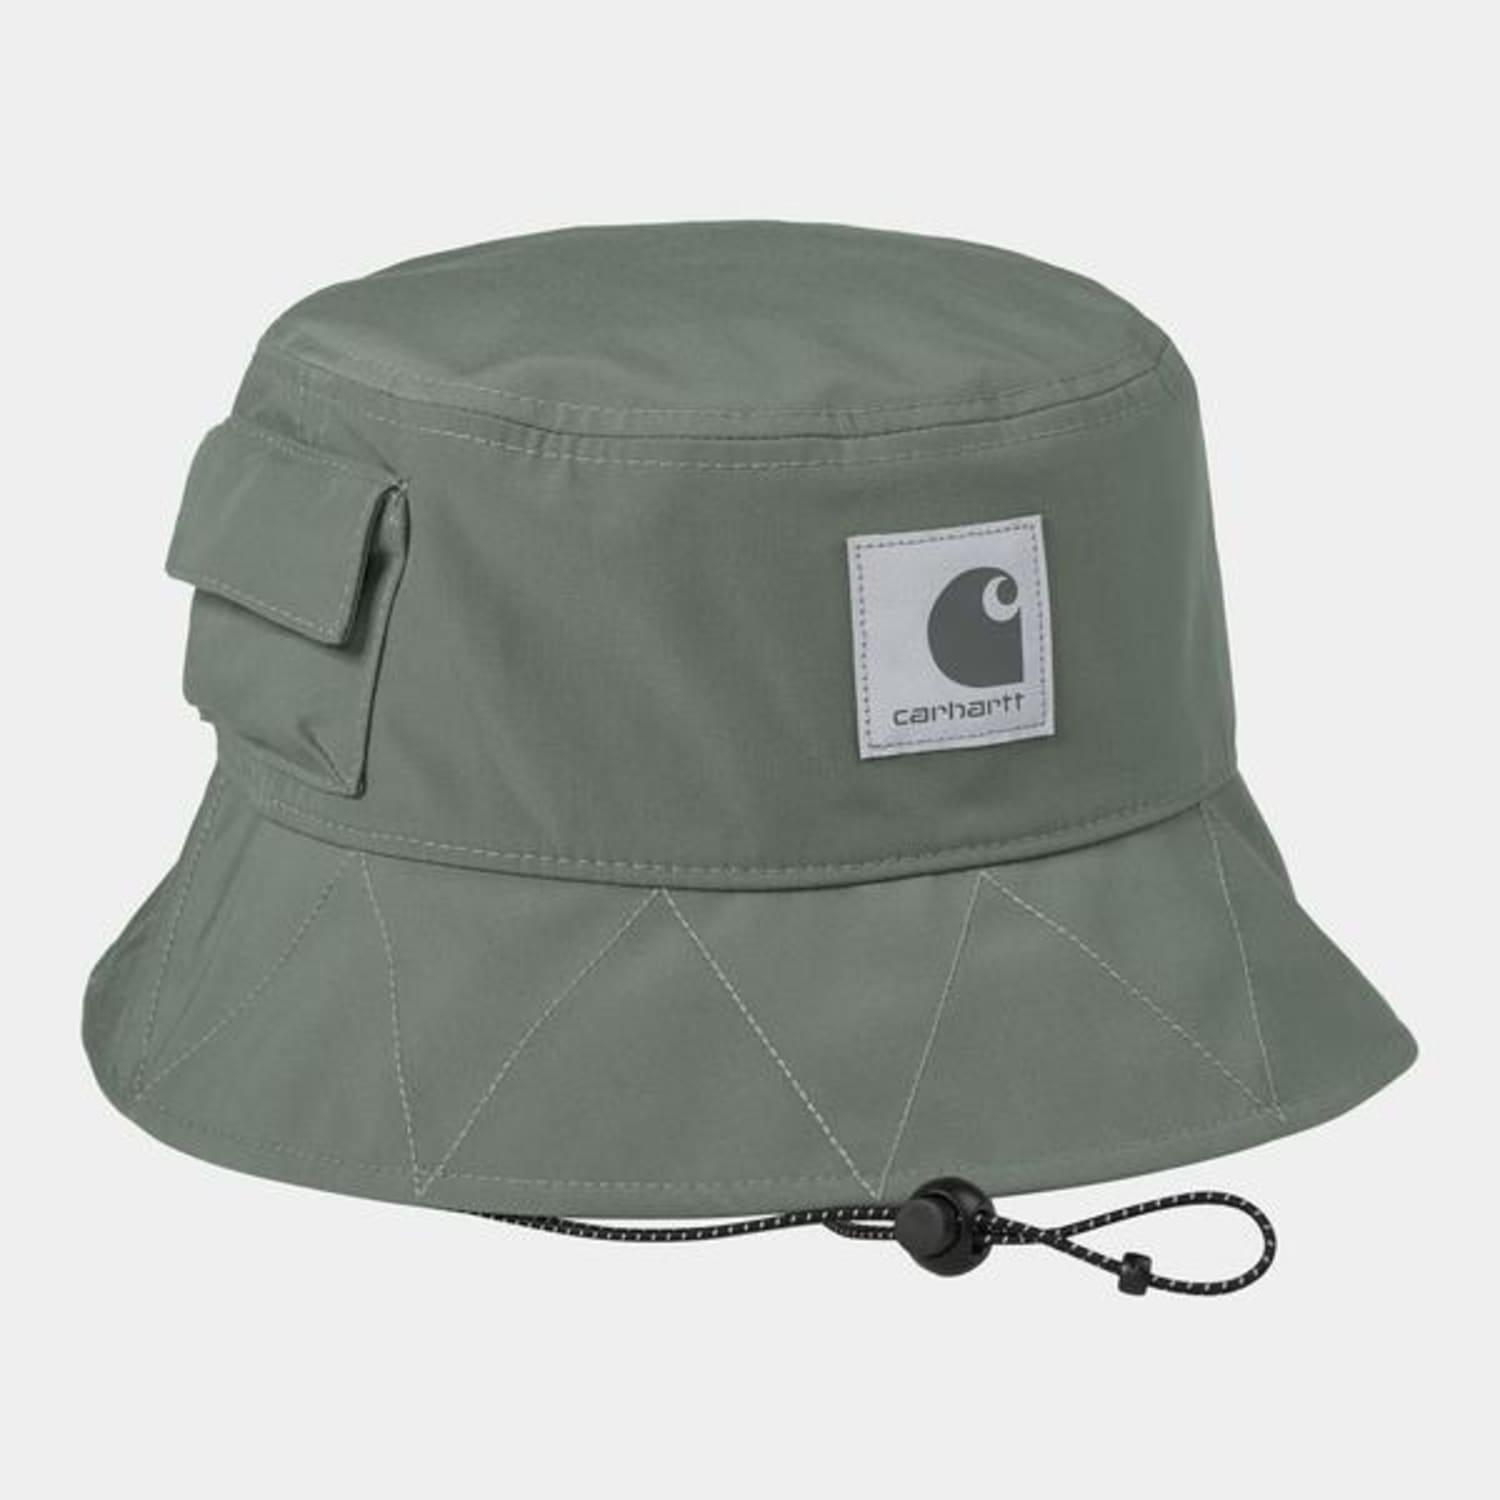 Carhartt WIP Kilda Bucket Hat - Thyme in Green (Gray) for Men - Save 69% |  Lyst